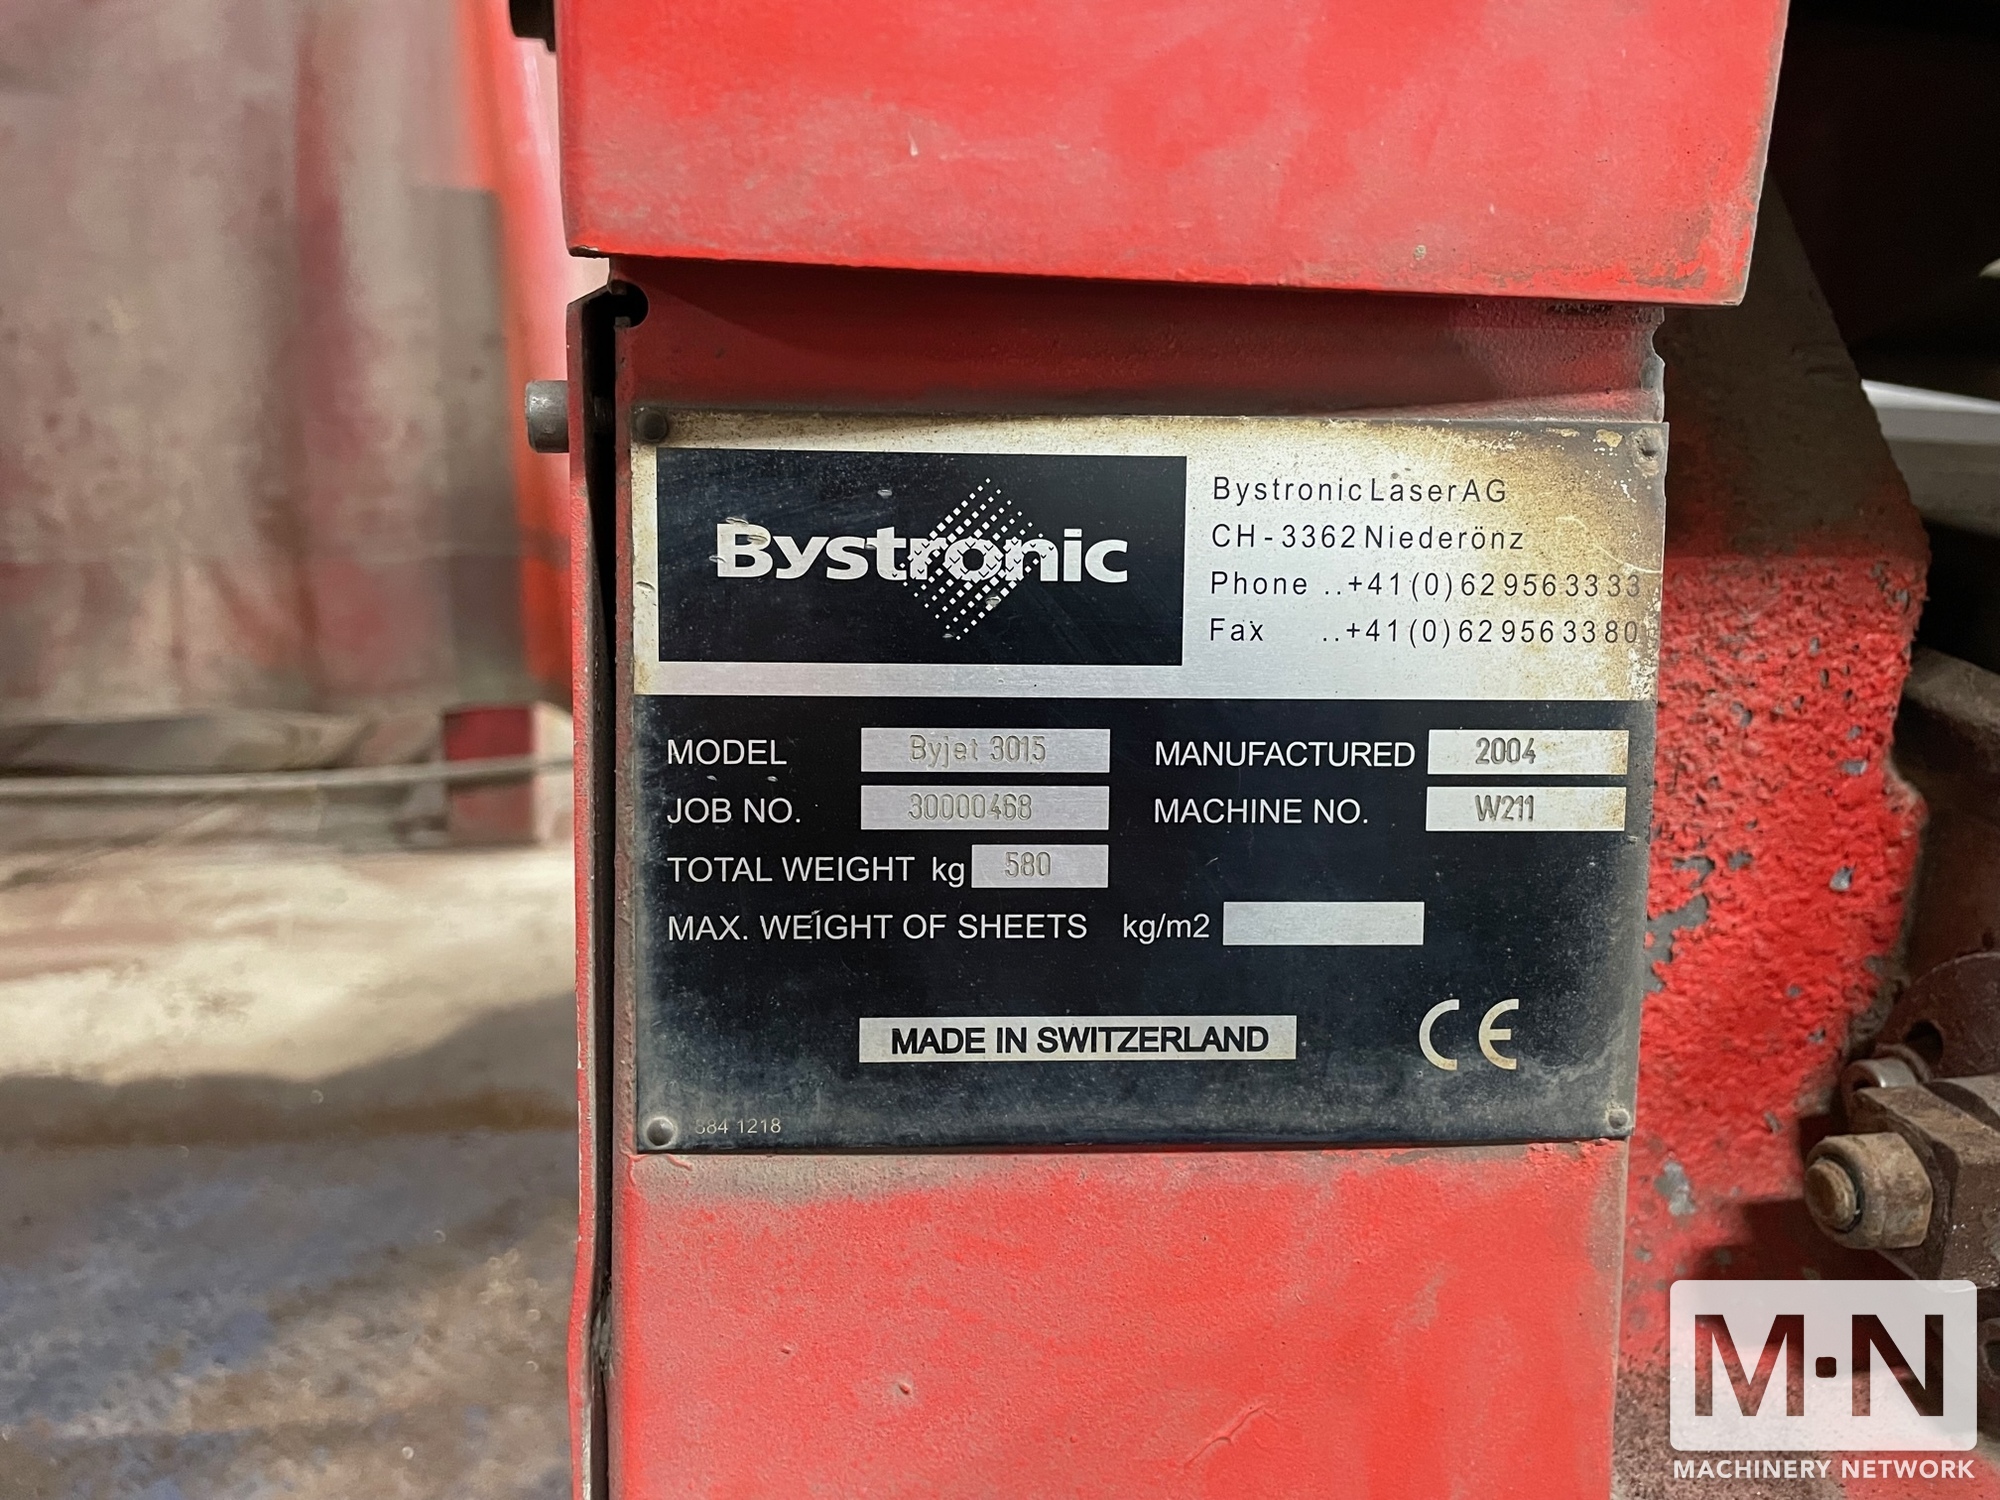 2004 BYSTRONIC BY JET 3015-2 WATER JET CUTTING, CNC | Machinery Network Inc.